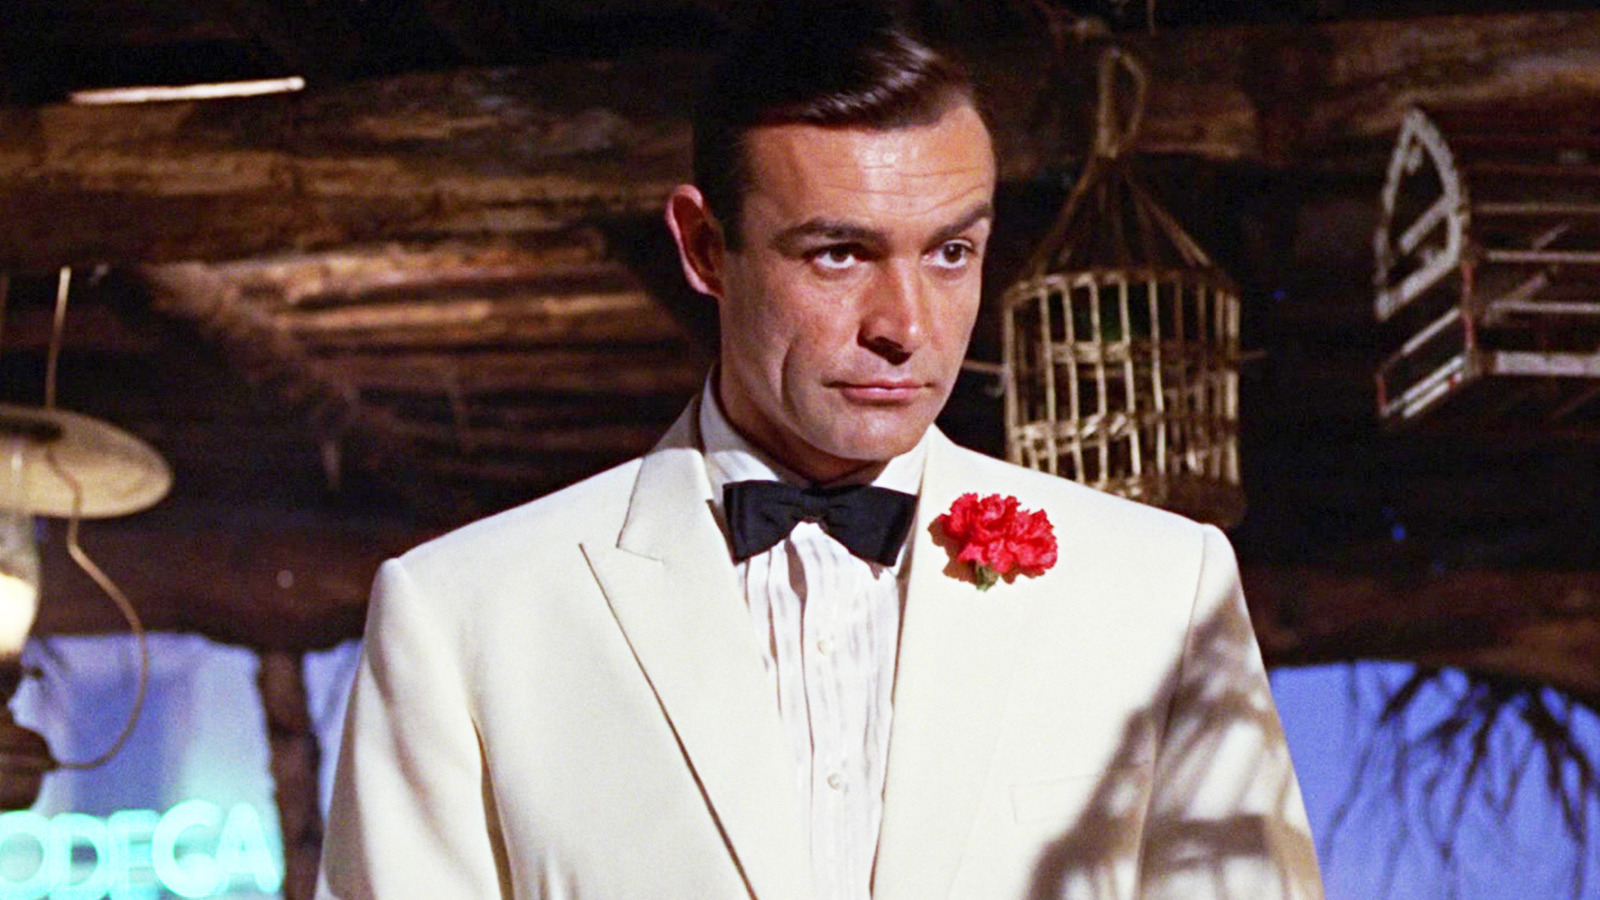 How Sean Connery Became James Bond Against the Creator's Wishes: The Story Behind the Casting Surprise